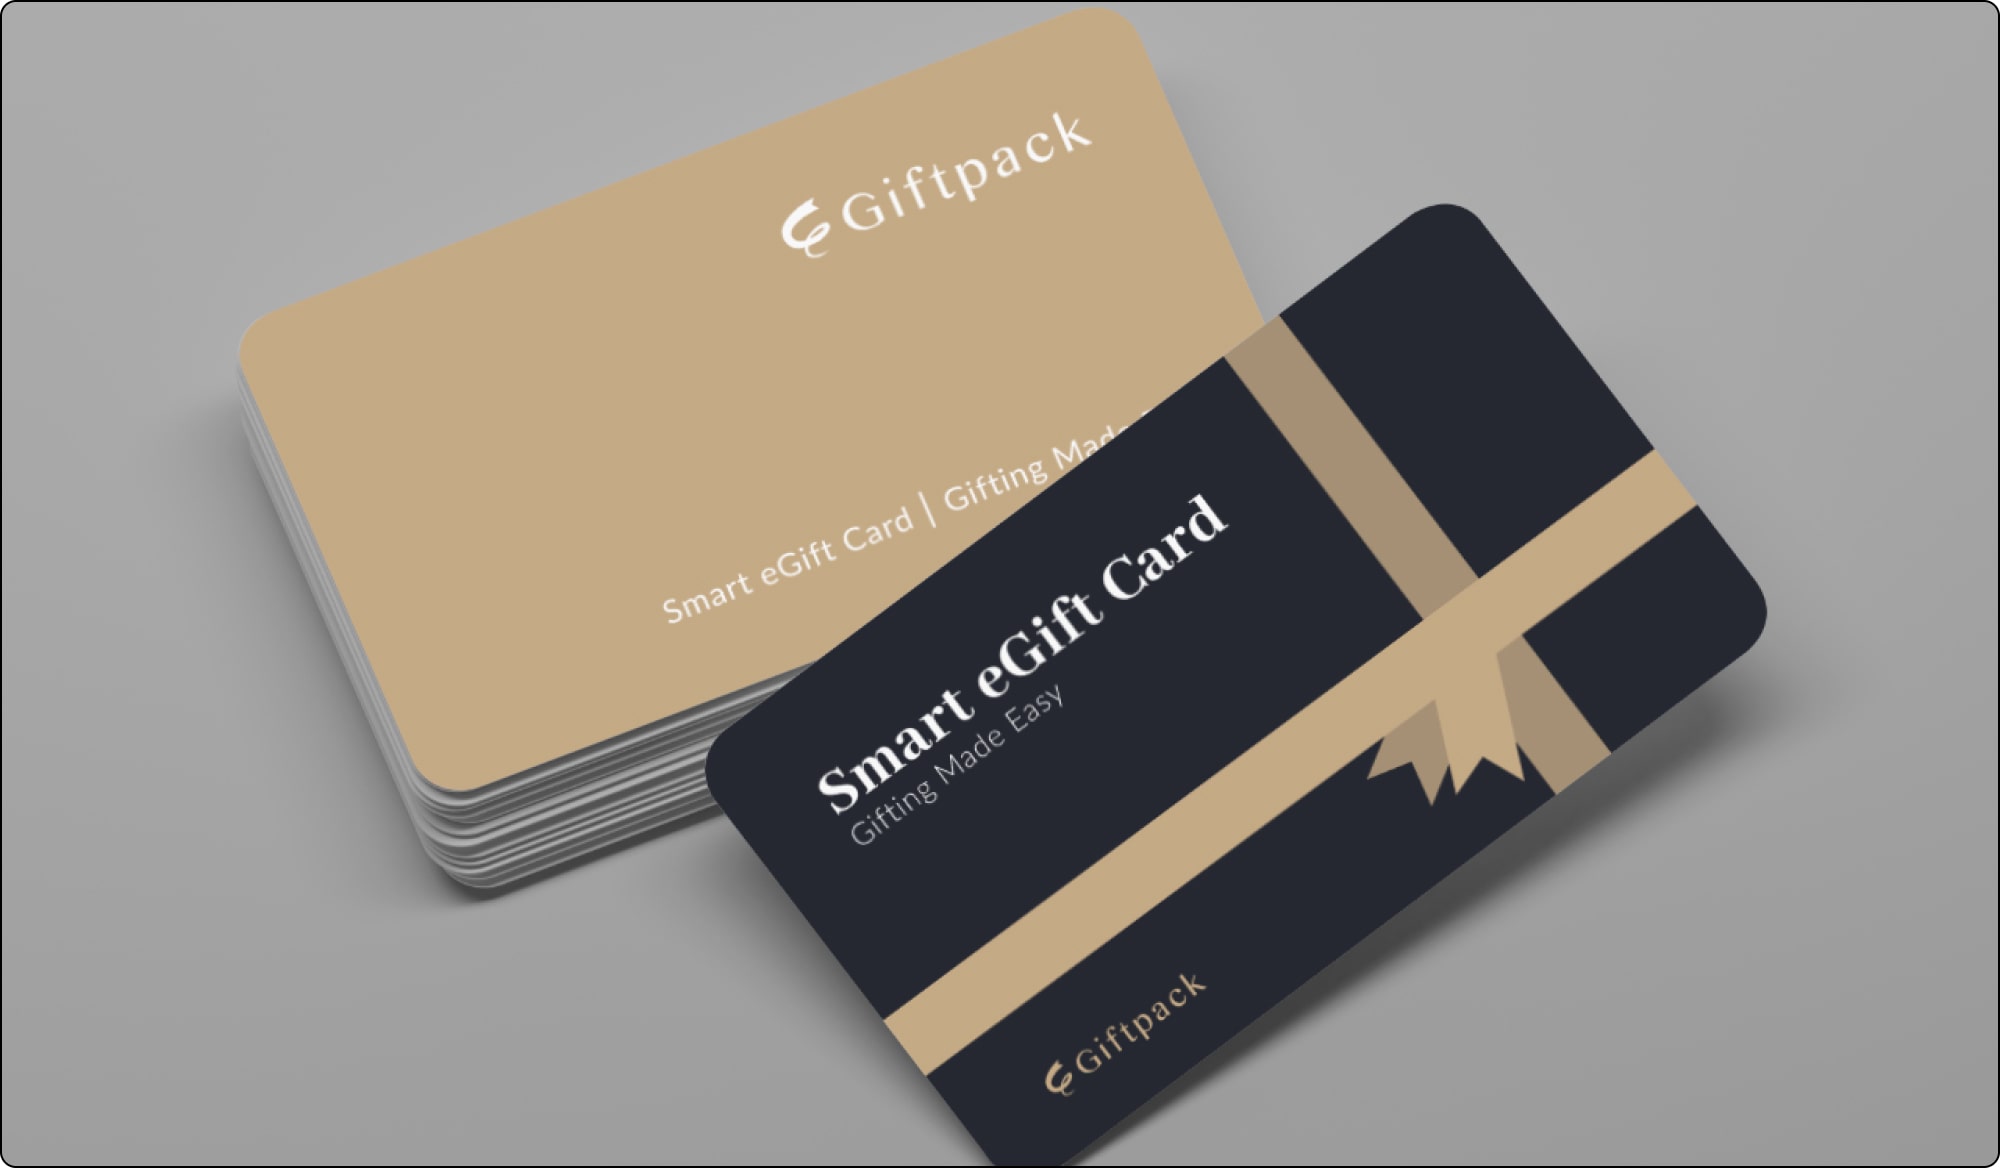 giftpack smart egift card for 350 brands for company gifts to employees